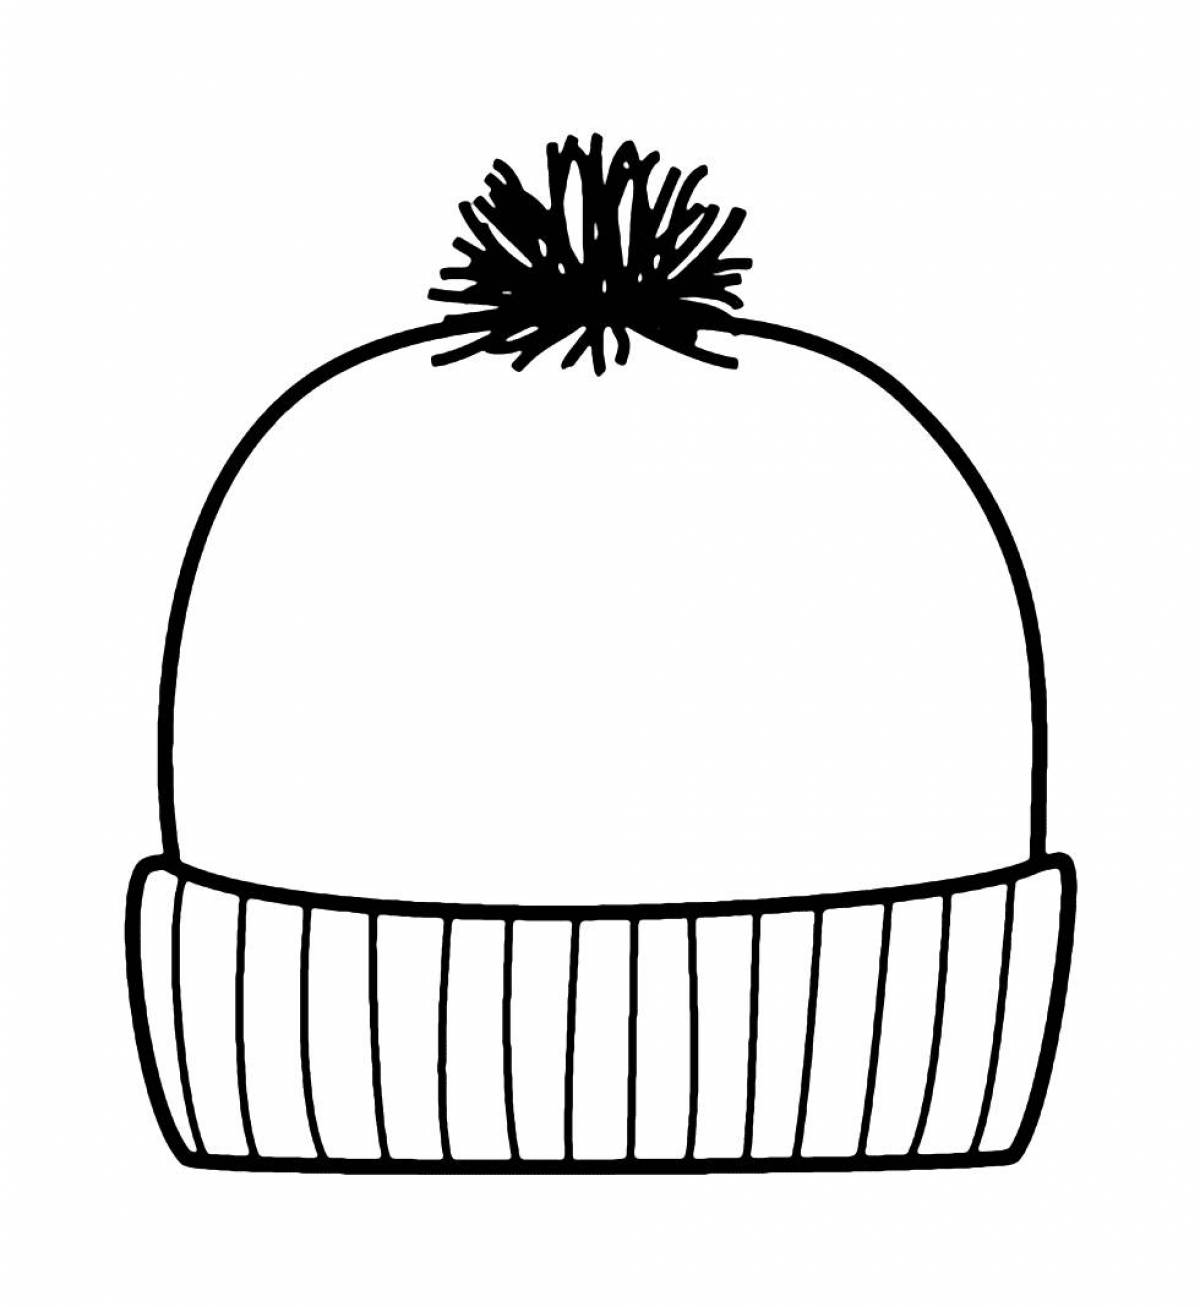 Incredible Hat Coloring Page for Toddlers